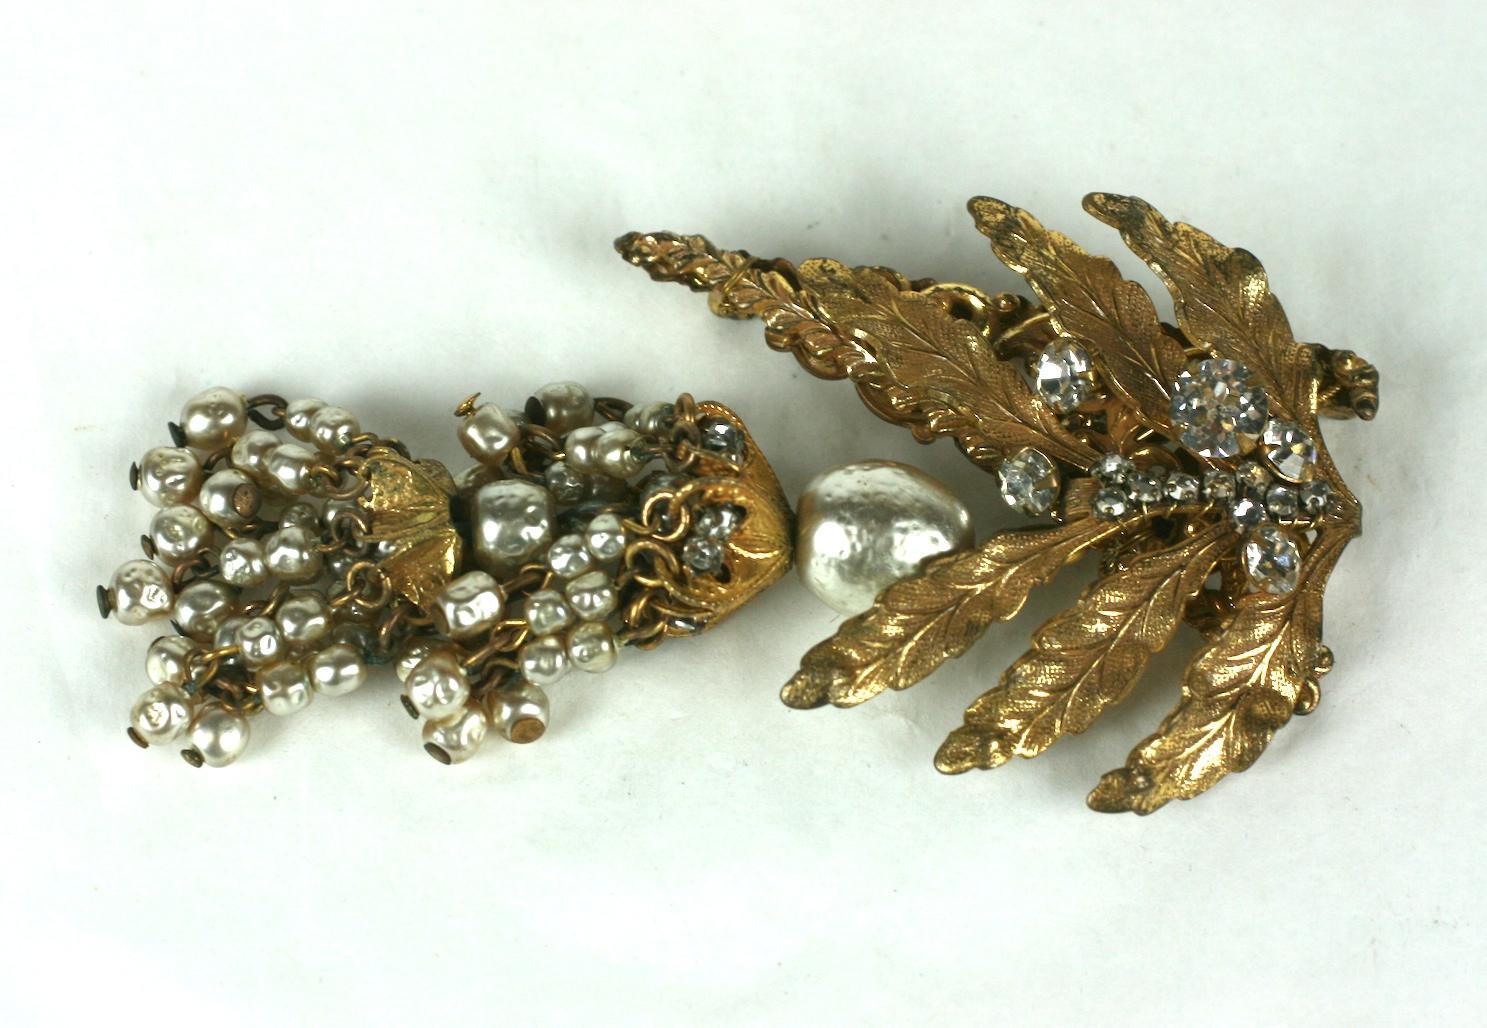 Lovely Haskell Leaf and Pearl Tassel Brooch from the 1940's. Elaborate Haskell signature faux pearls create a tiered tassel which is suspended from a gilt leaf brooch decorated with hand sewn crystals.  
Excellent condition. Signed.   3.5